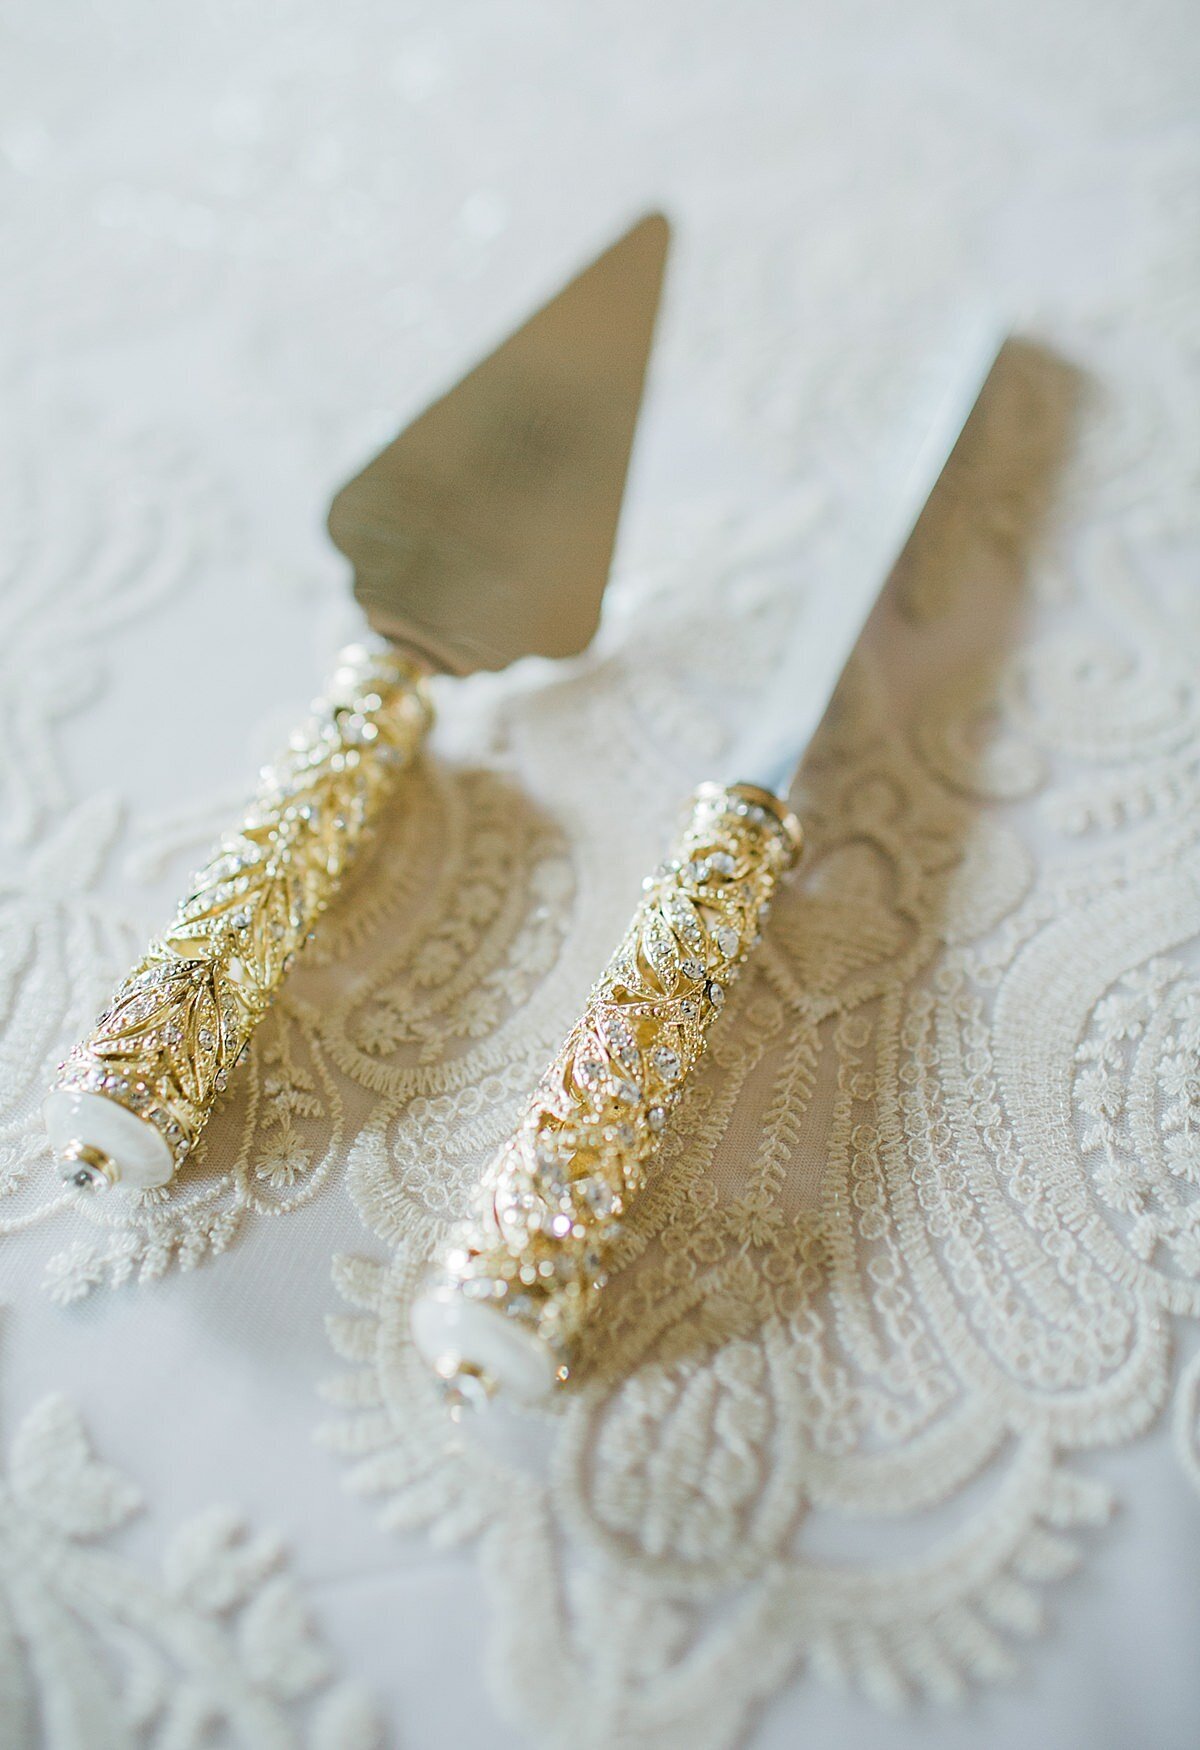 Gold and white filigree cake serving tools on a white lace table cloth.